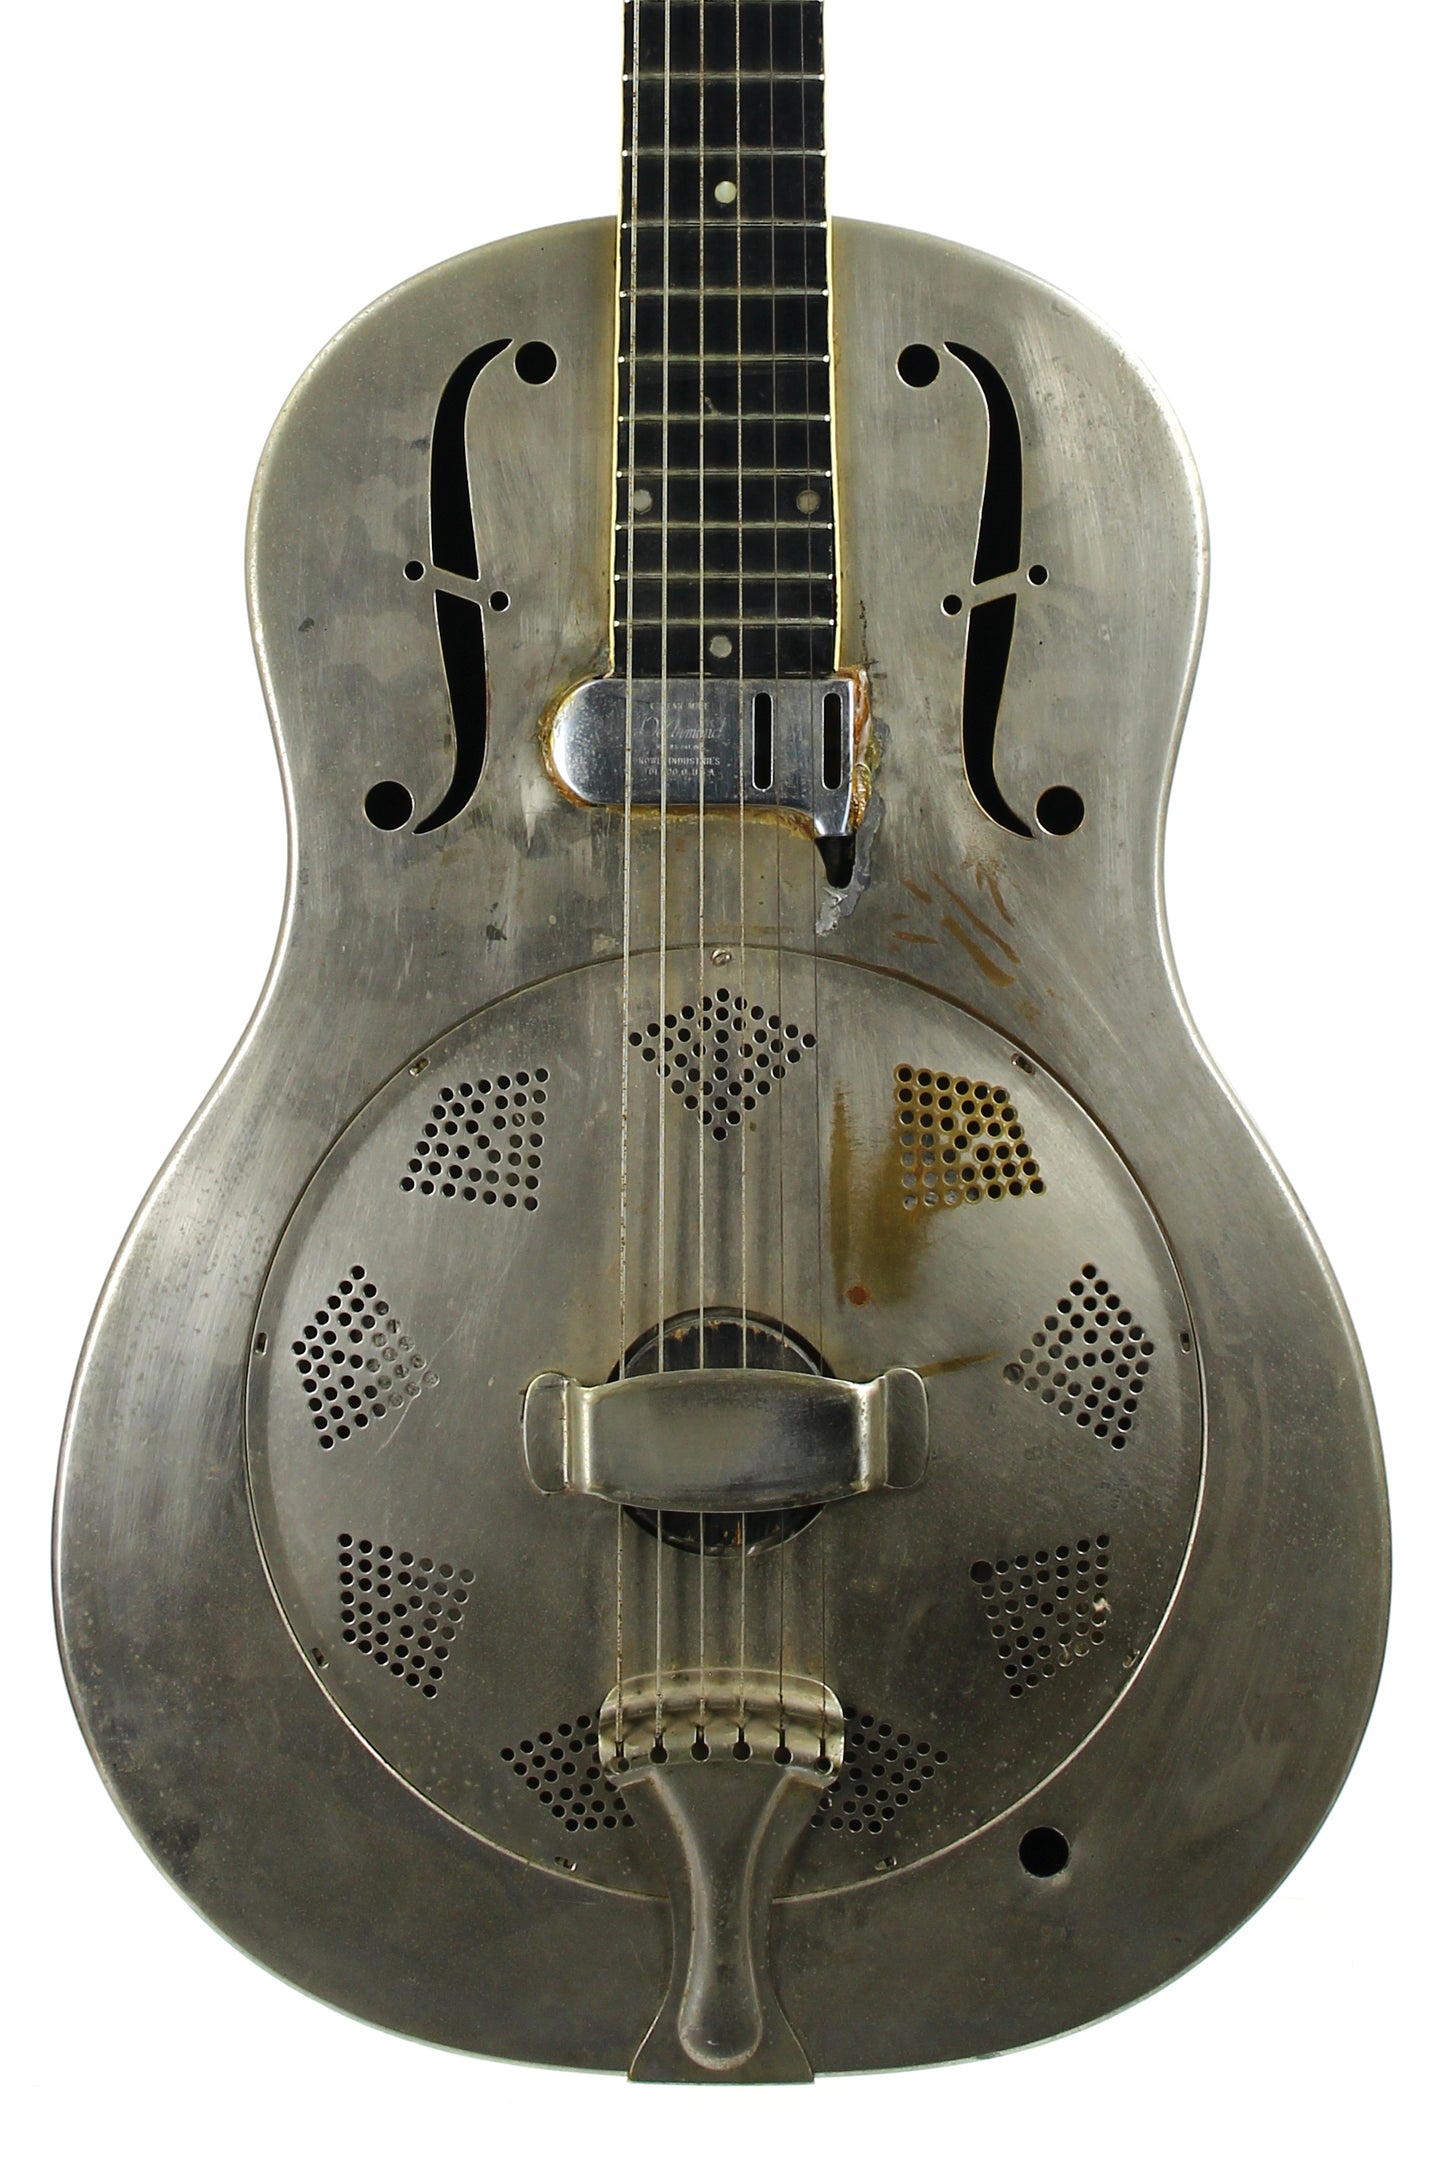 1930 National Style 0 Round Neck Resonator Electric Guitar | Vintage Electrified!